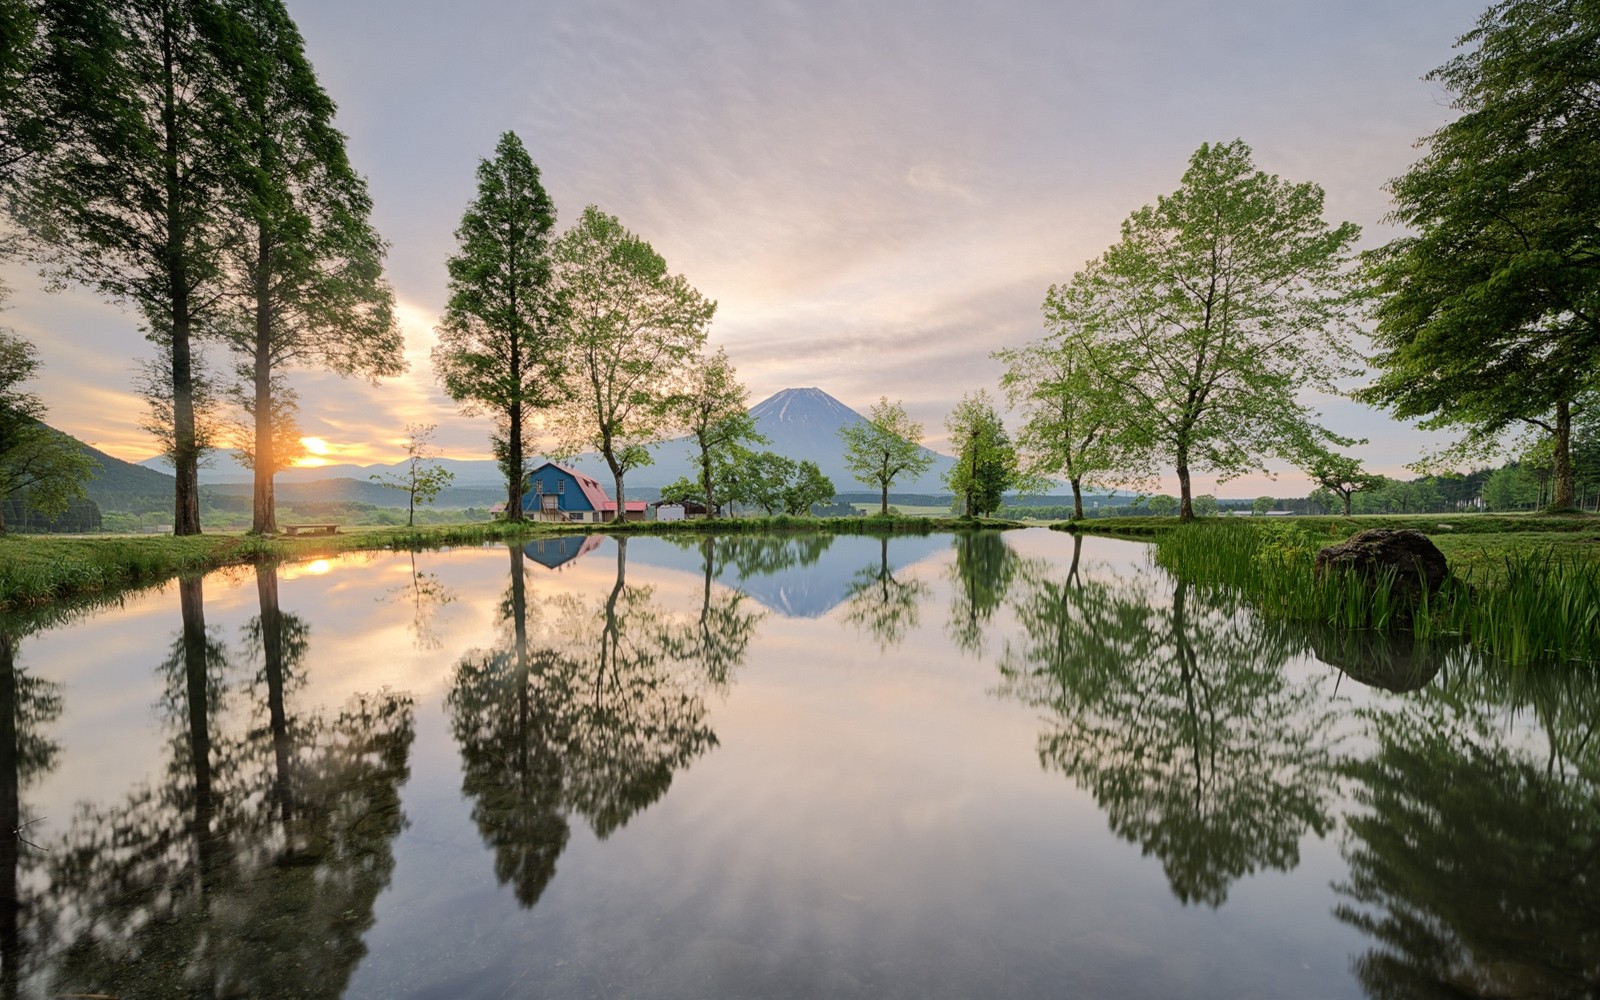 General 1600x1000 landscape nature Japan trees reflection mountains grass water pond spring